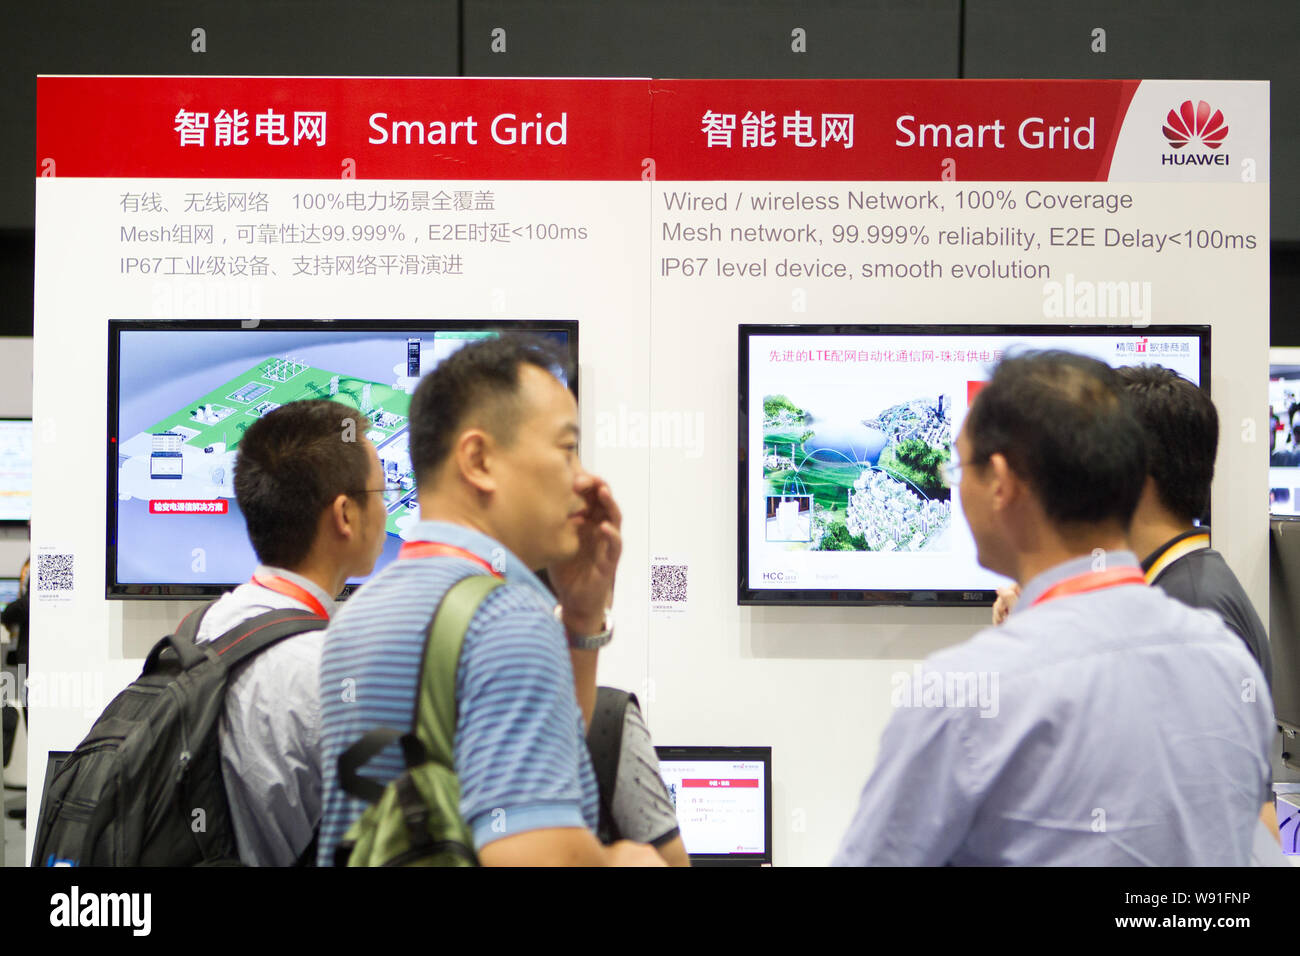 People visit the stand of Huawei Smart Grid during HCC 2013 (the 2013 Huawei Cloud Congress) in Shanghai, China, 2 September 2013.   Huawei Technologi Stock Photo